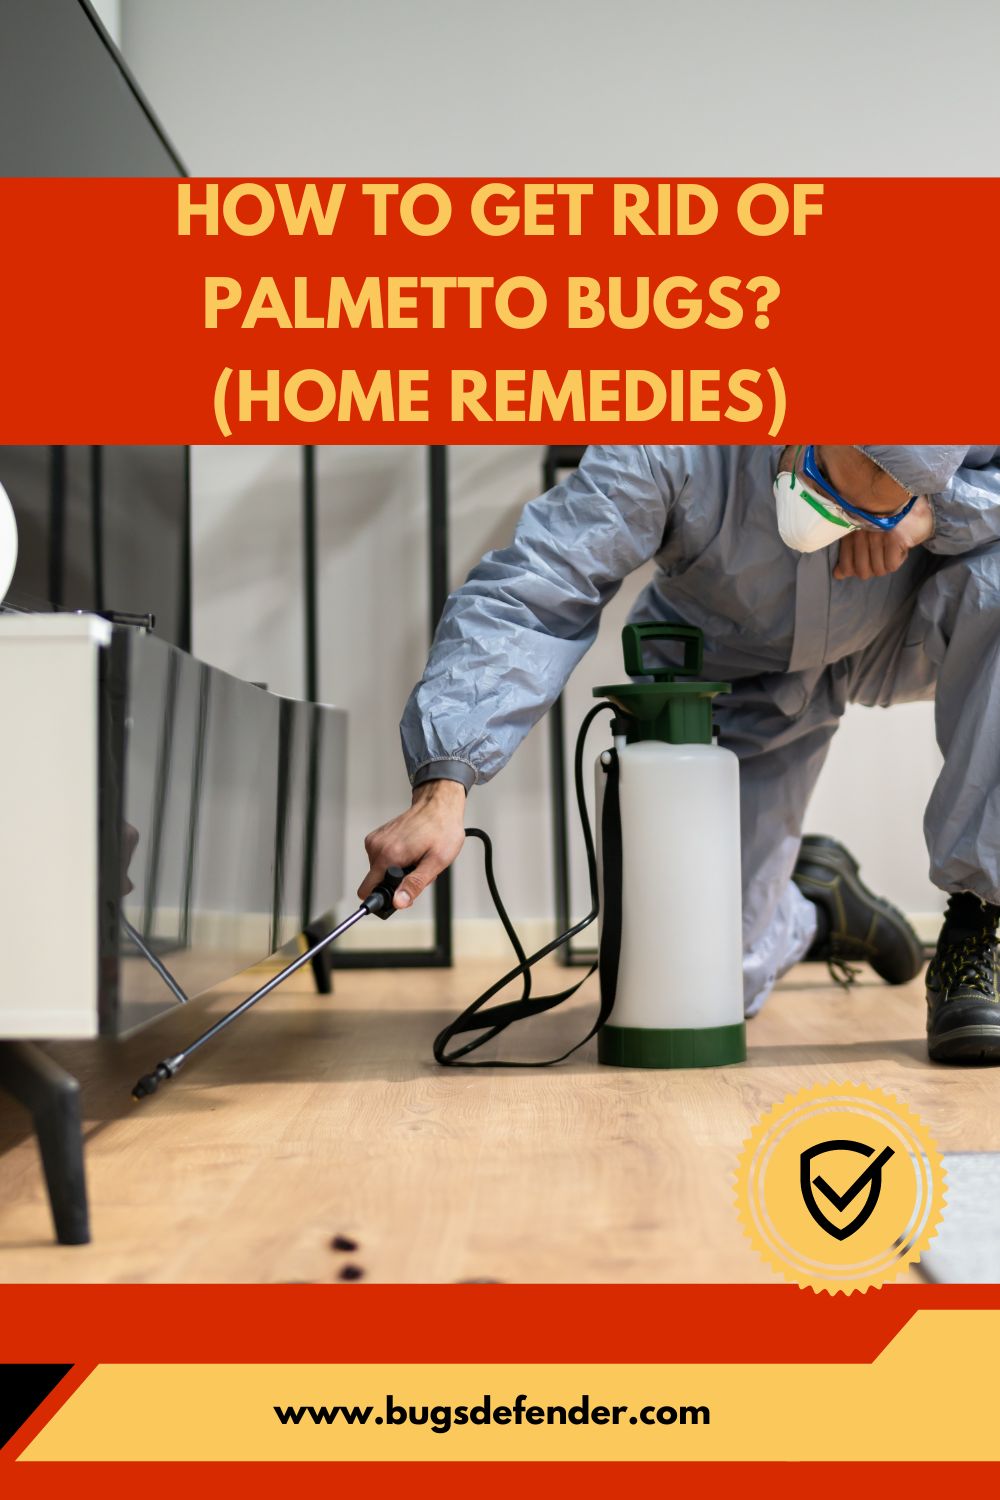 How To Get Rid Of Palmetto Bugs? (Home Remedies) pin 2